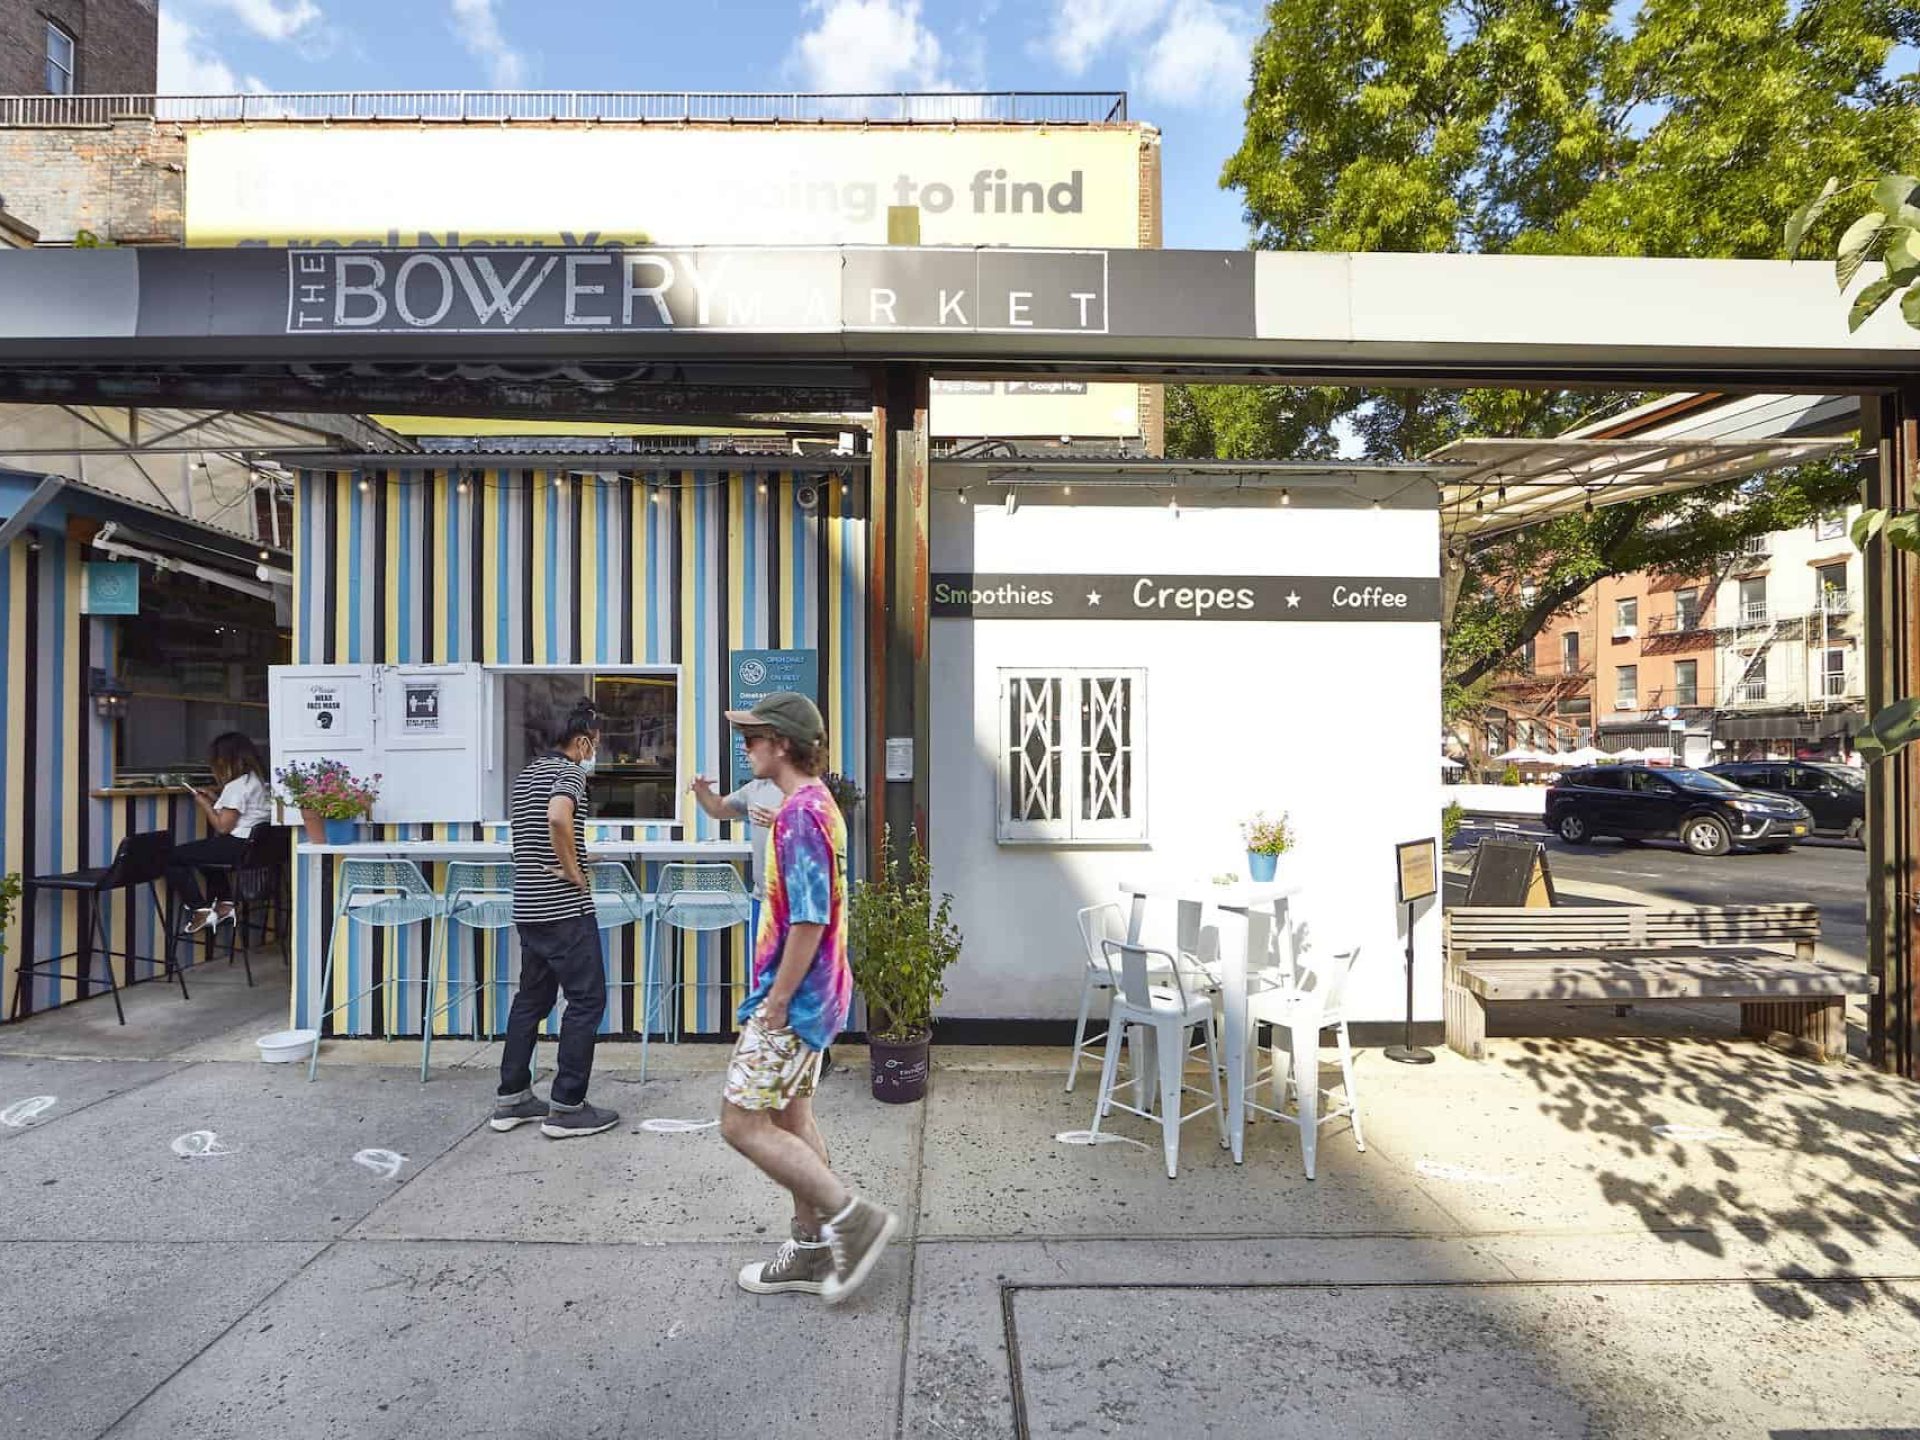 Street view of the Bowery Market in Noho. Street diner offering smoothies, crepes and coffee with people walking by.